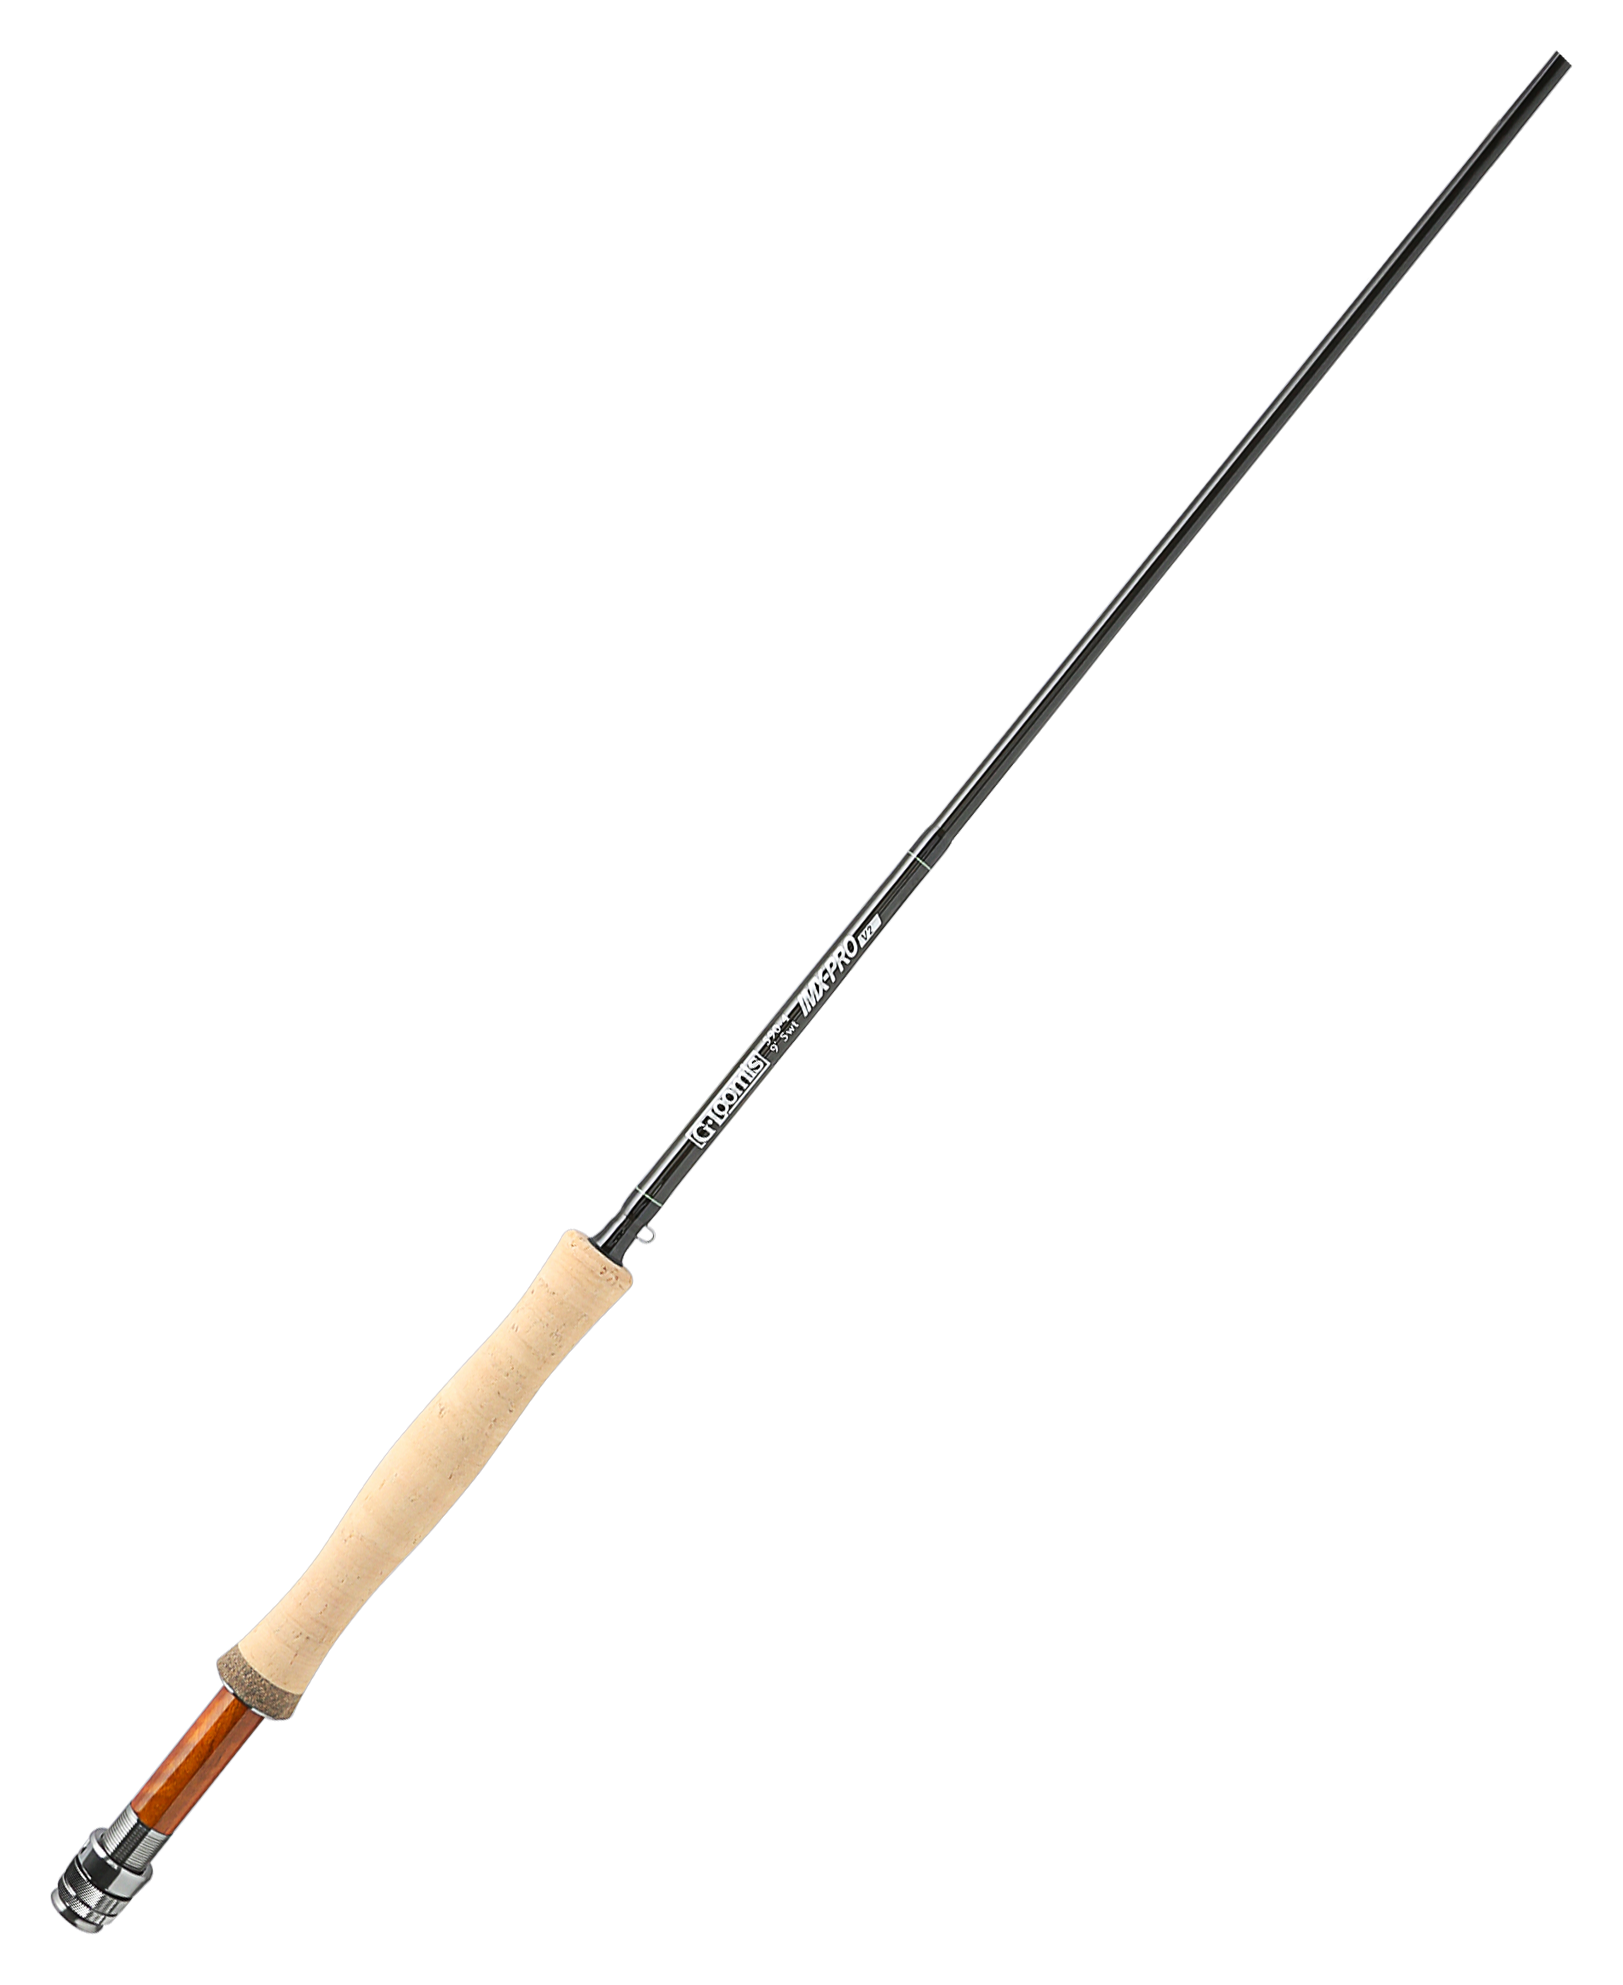 G.Loomis IMX-PRO V2 Fly Rod - Line Weight 5